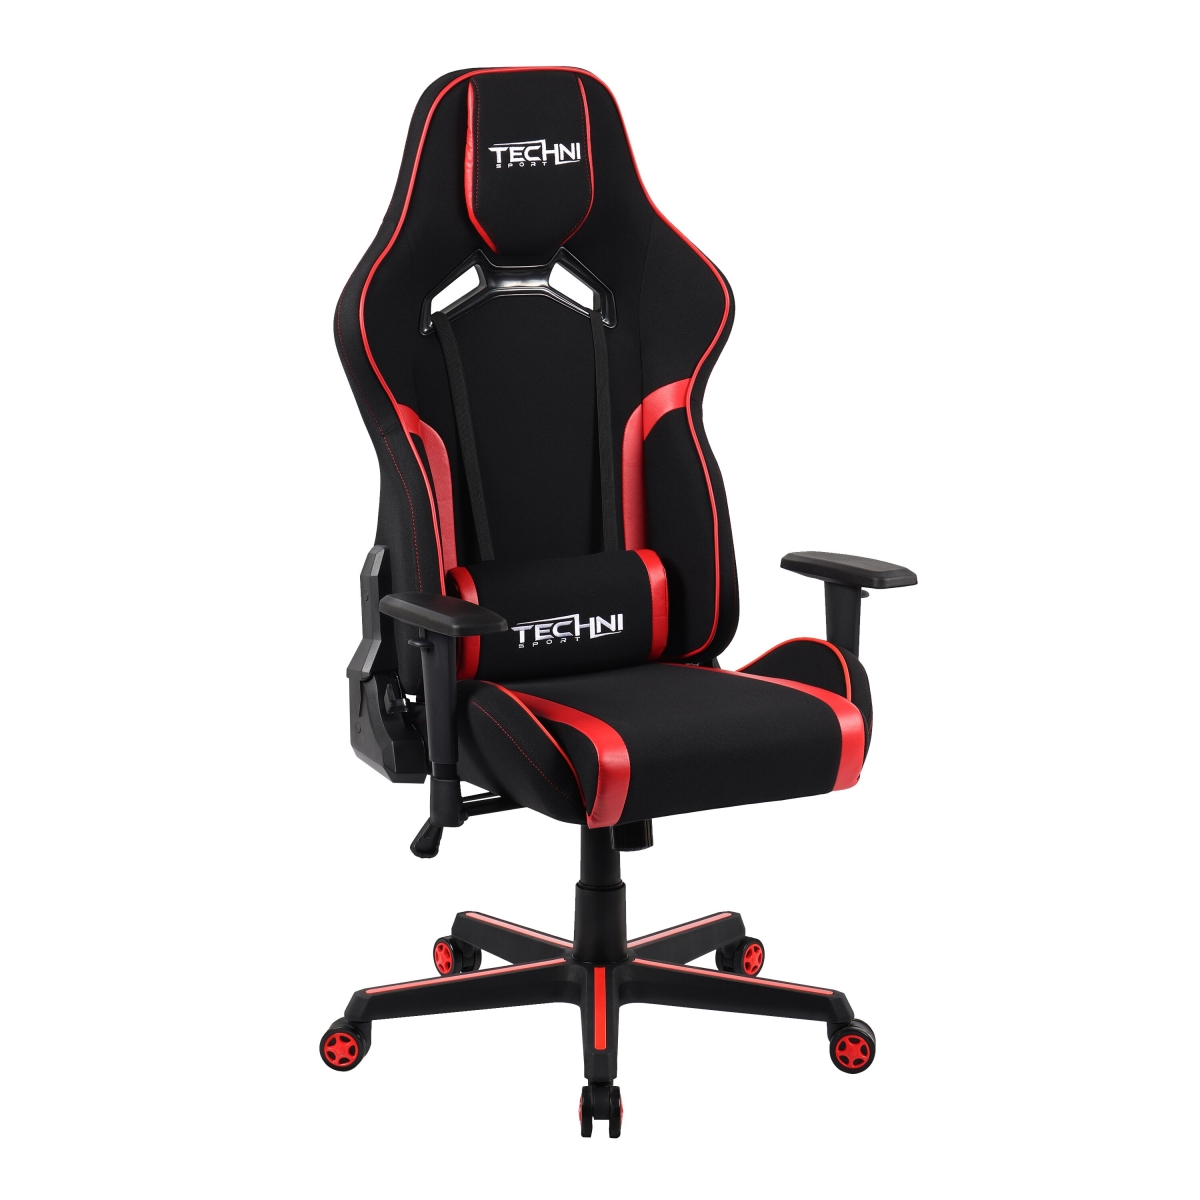 Rta-tsf71-red Fabric & Polyurethane Office-pc Gaming Chair,red